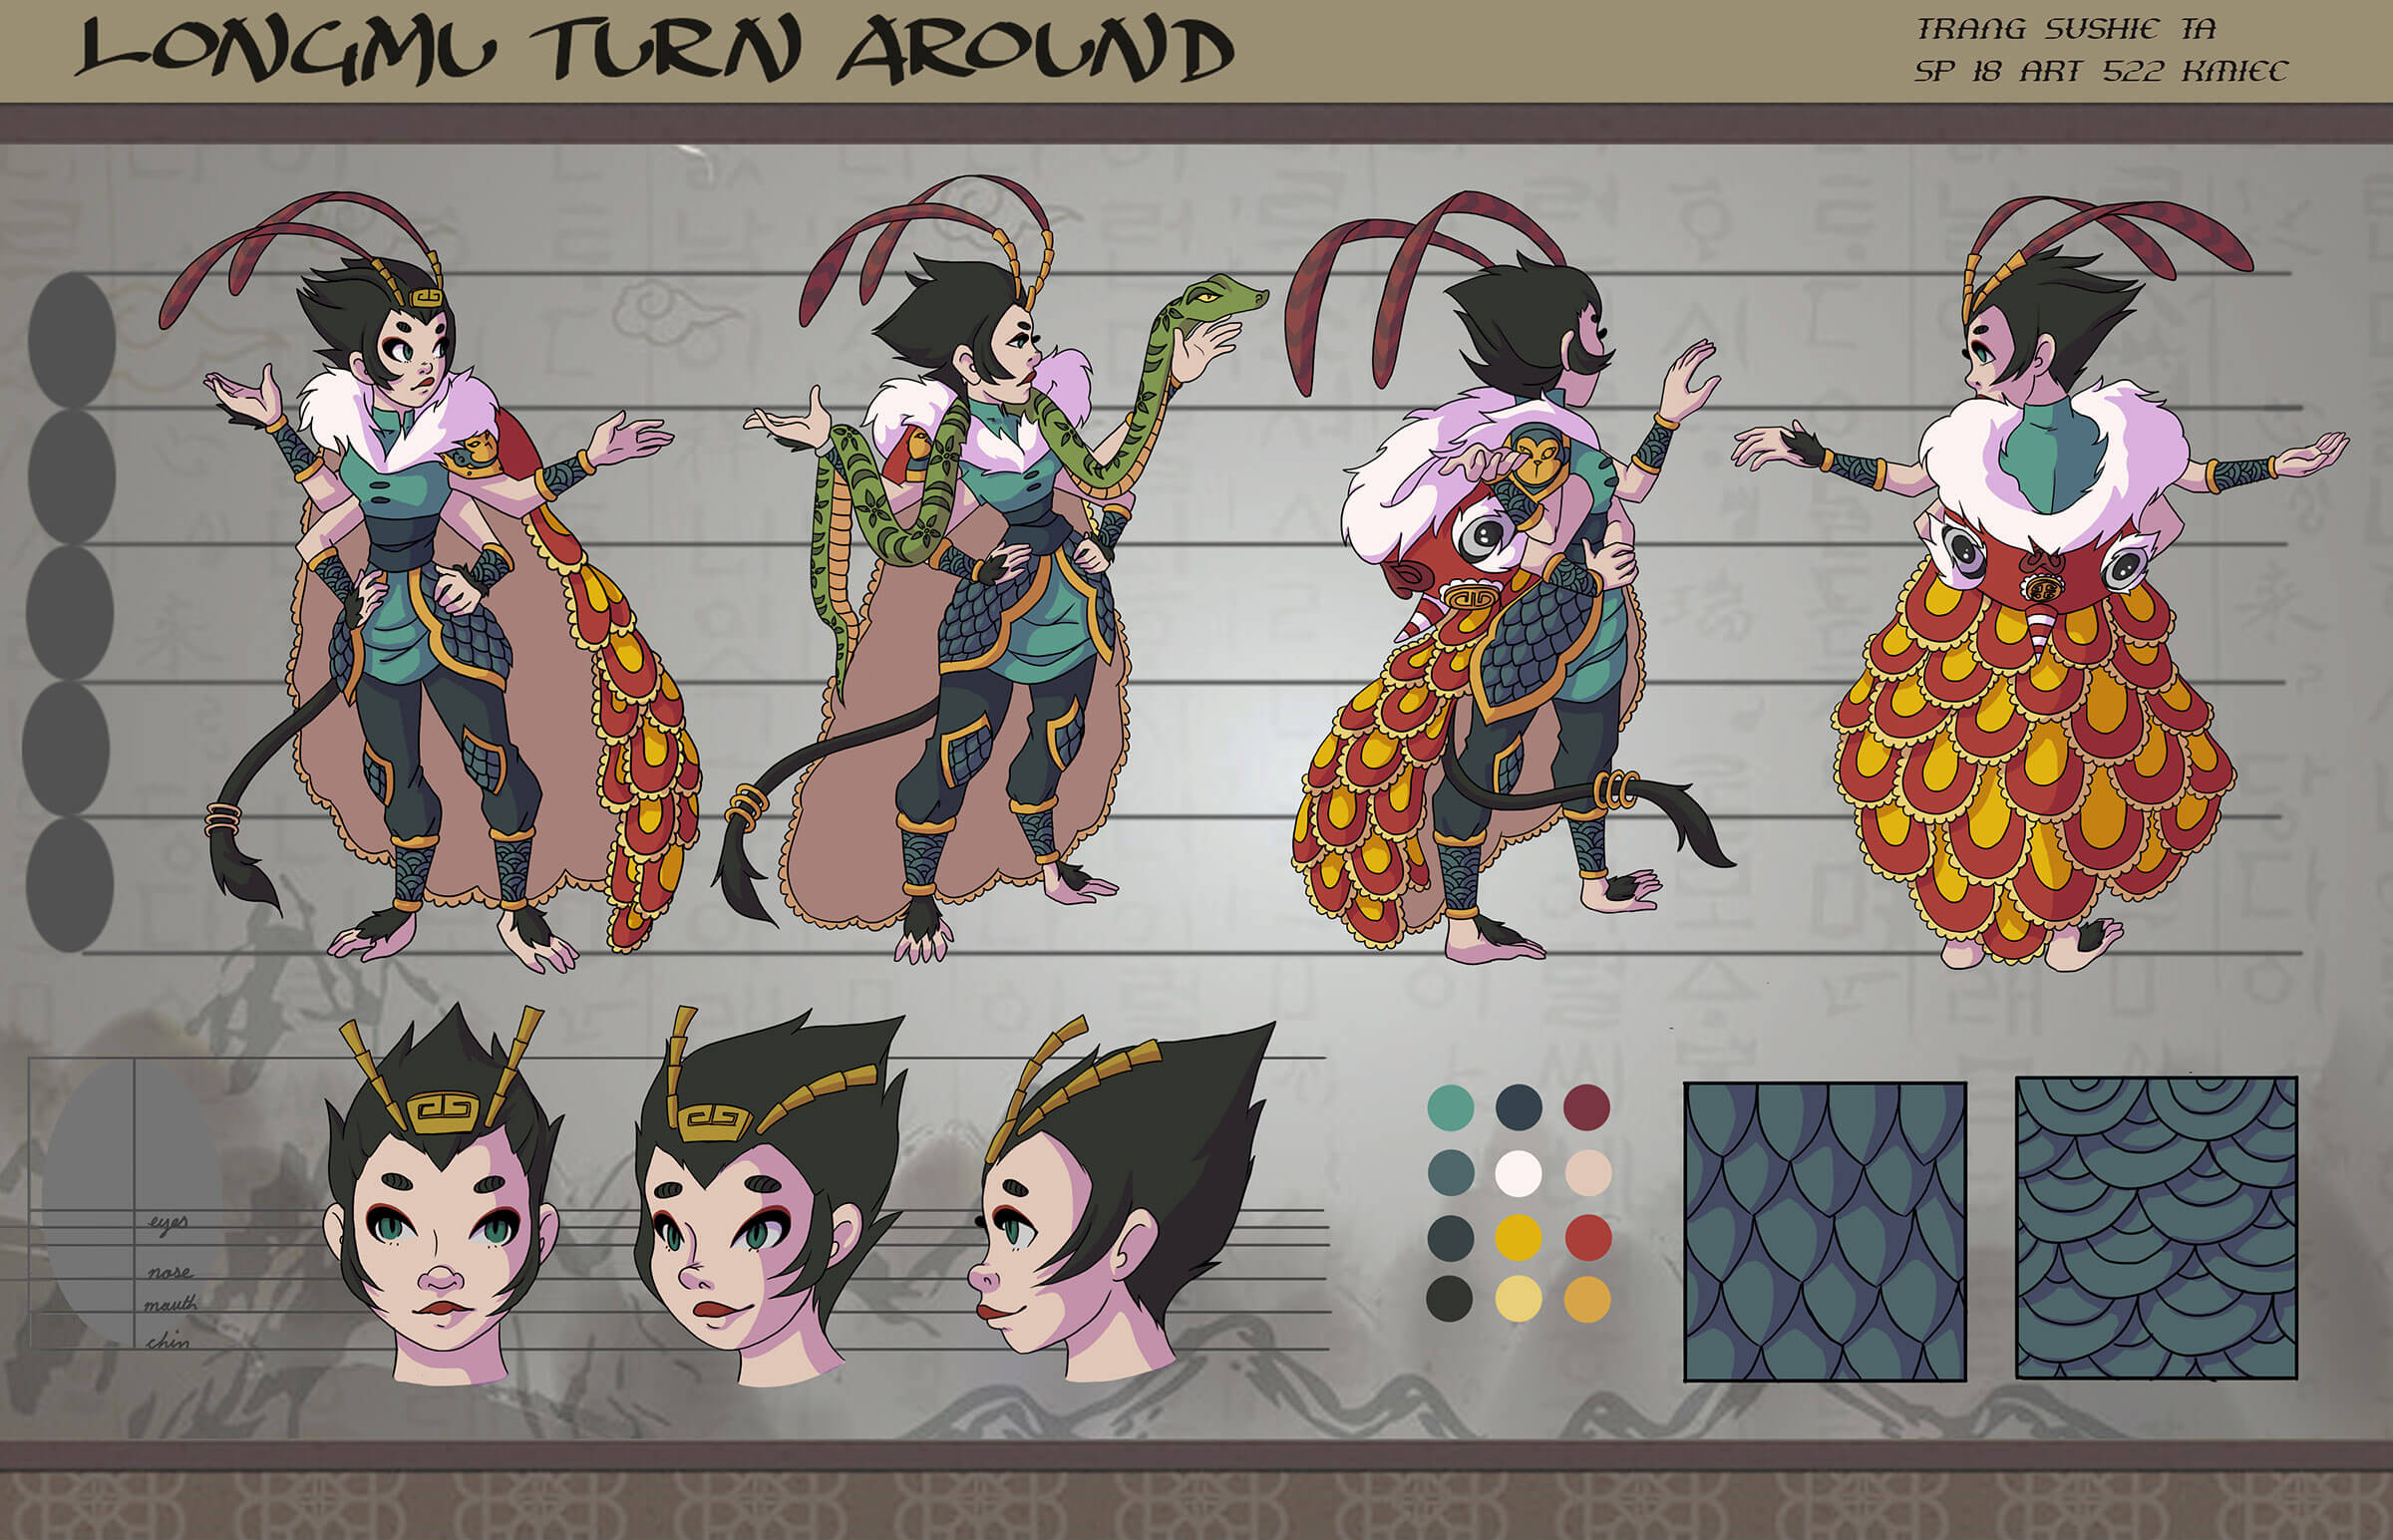 Turnaround views of a four-armed, tailed woman with antennas in warrior garb wearing a lion-dance inspired cape.